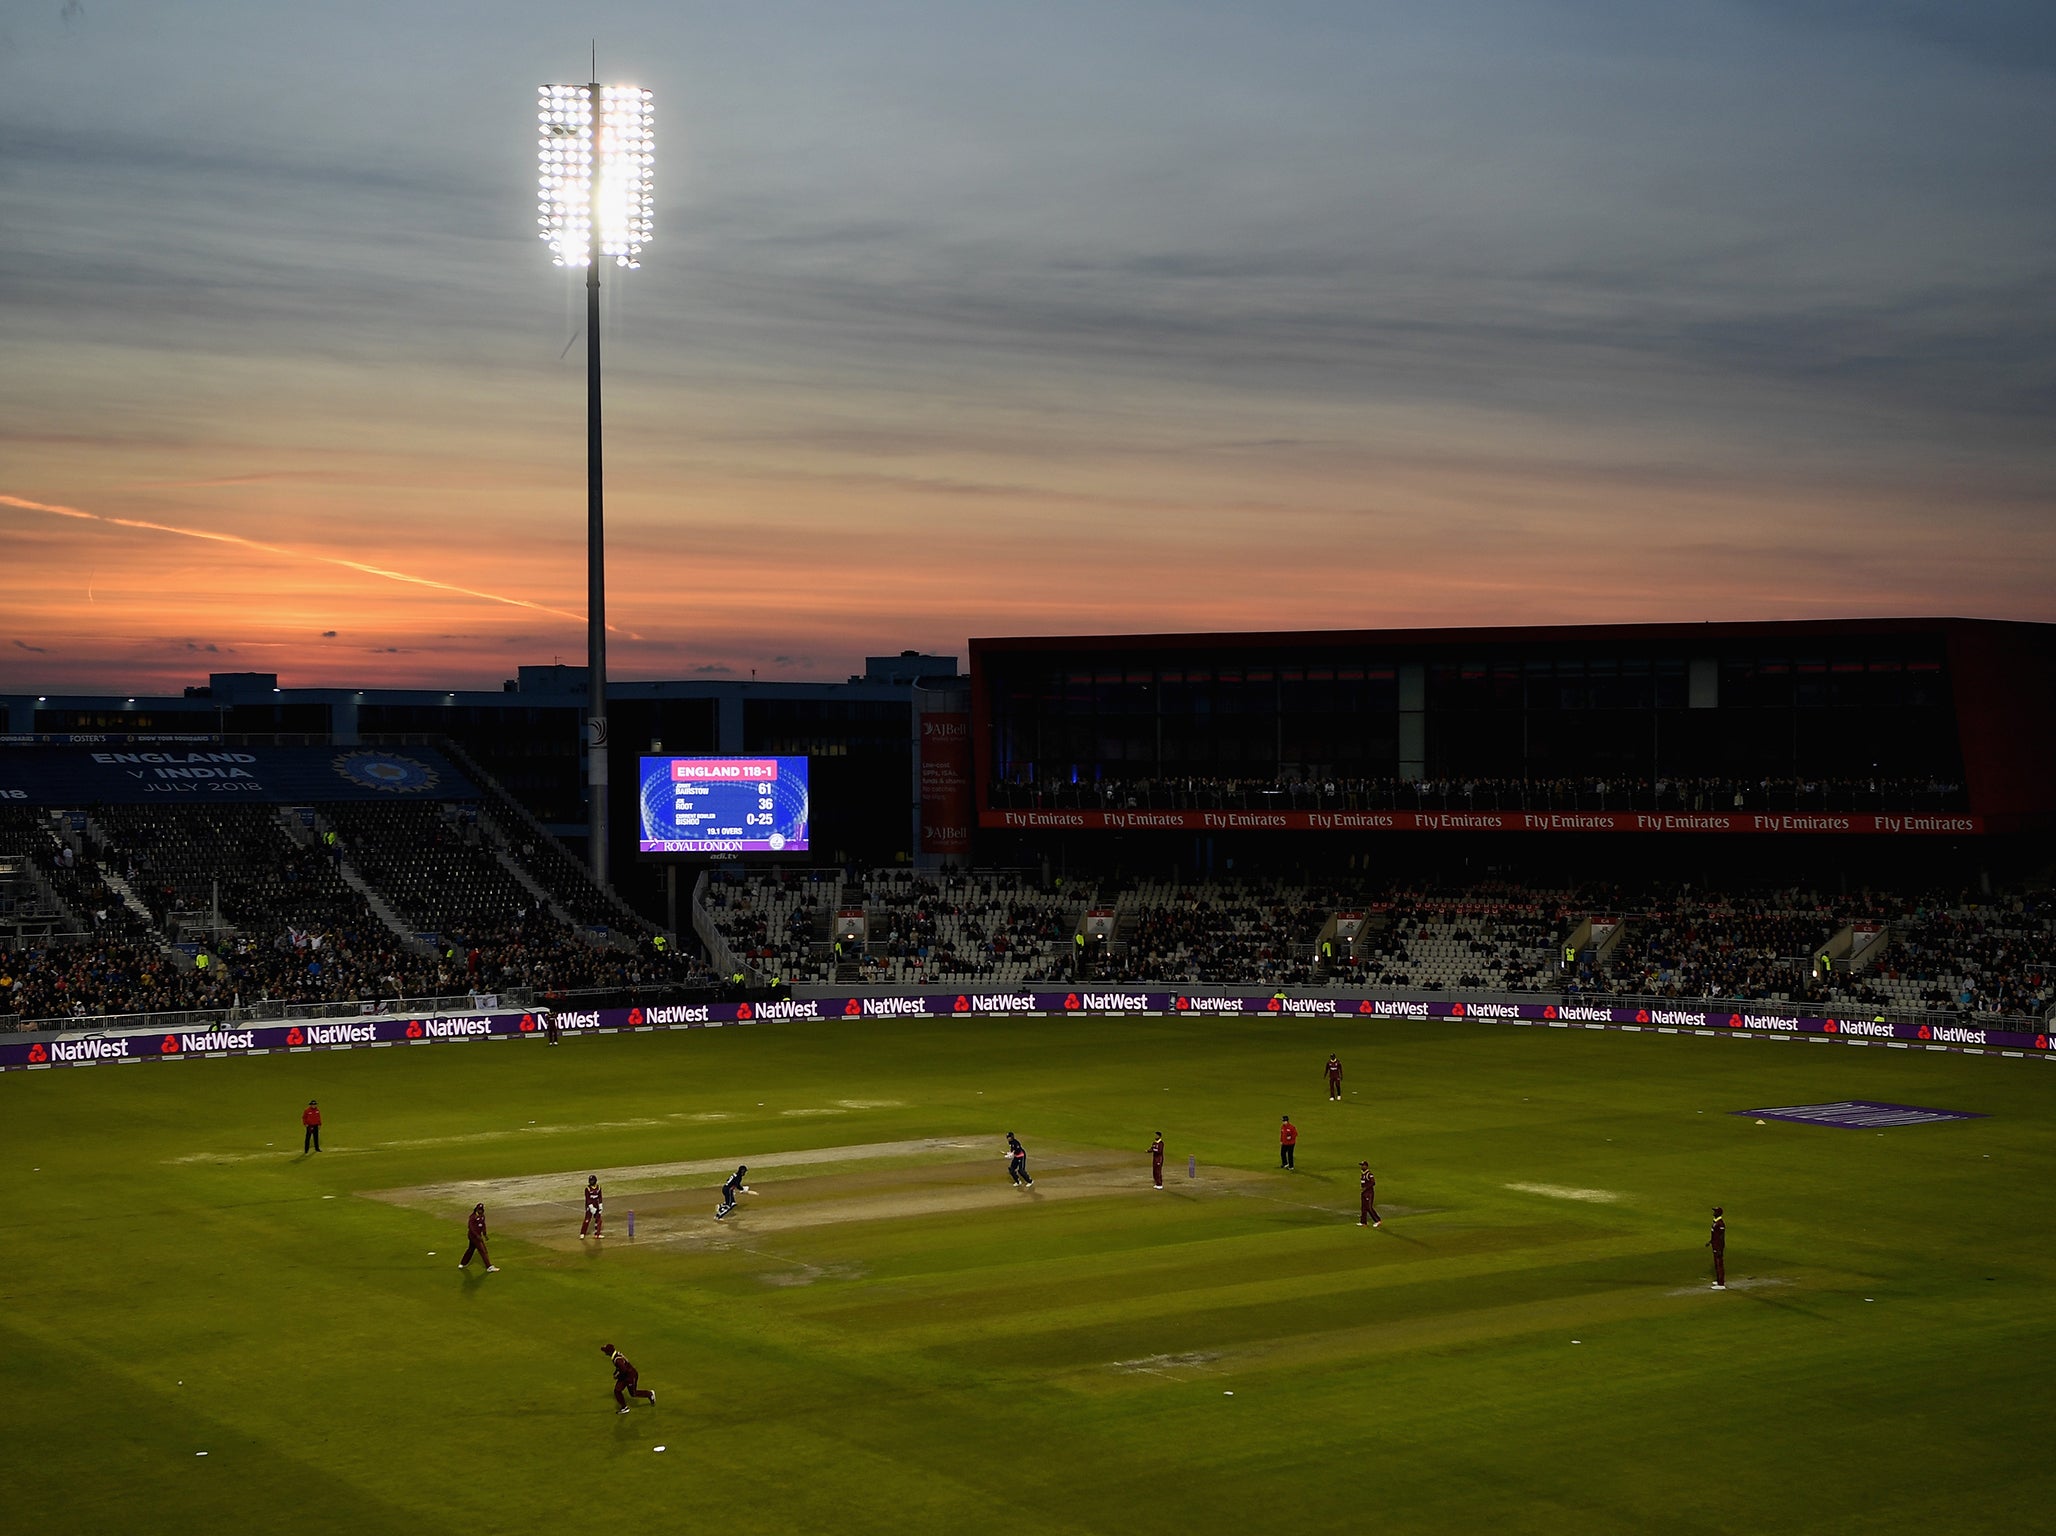 The sun sets over Old Trafford